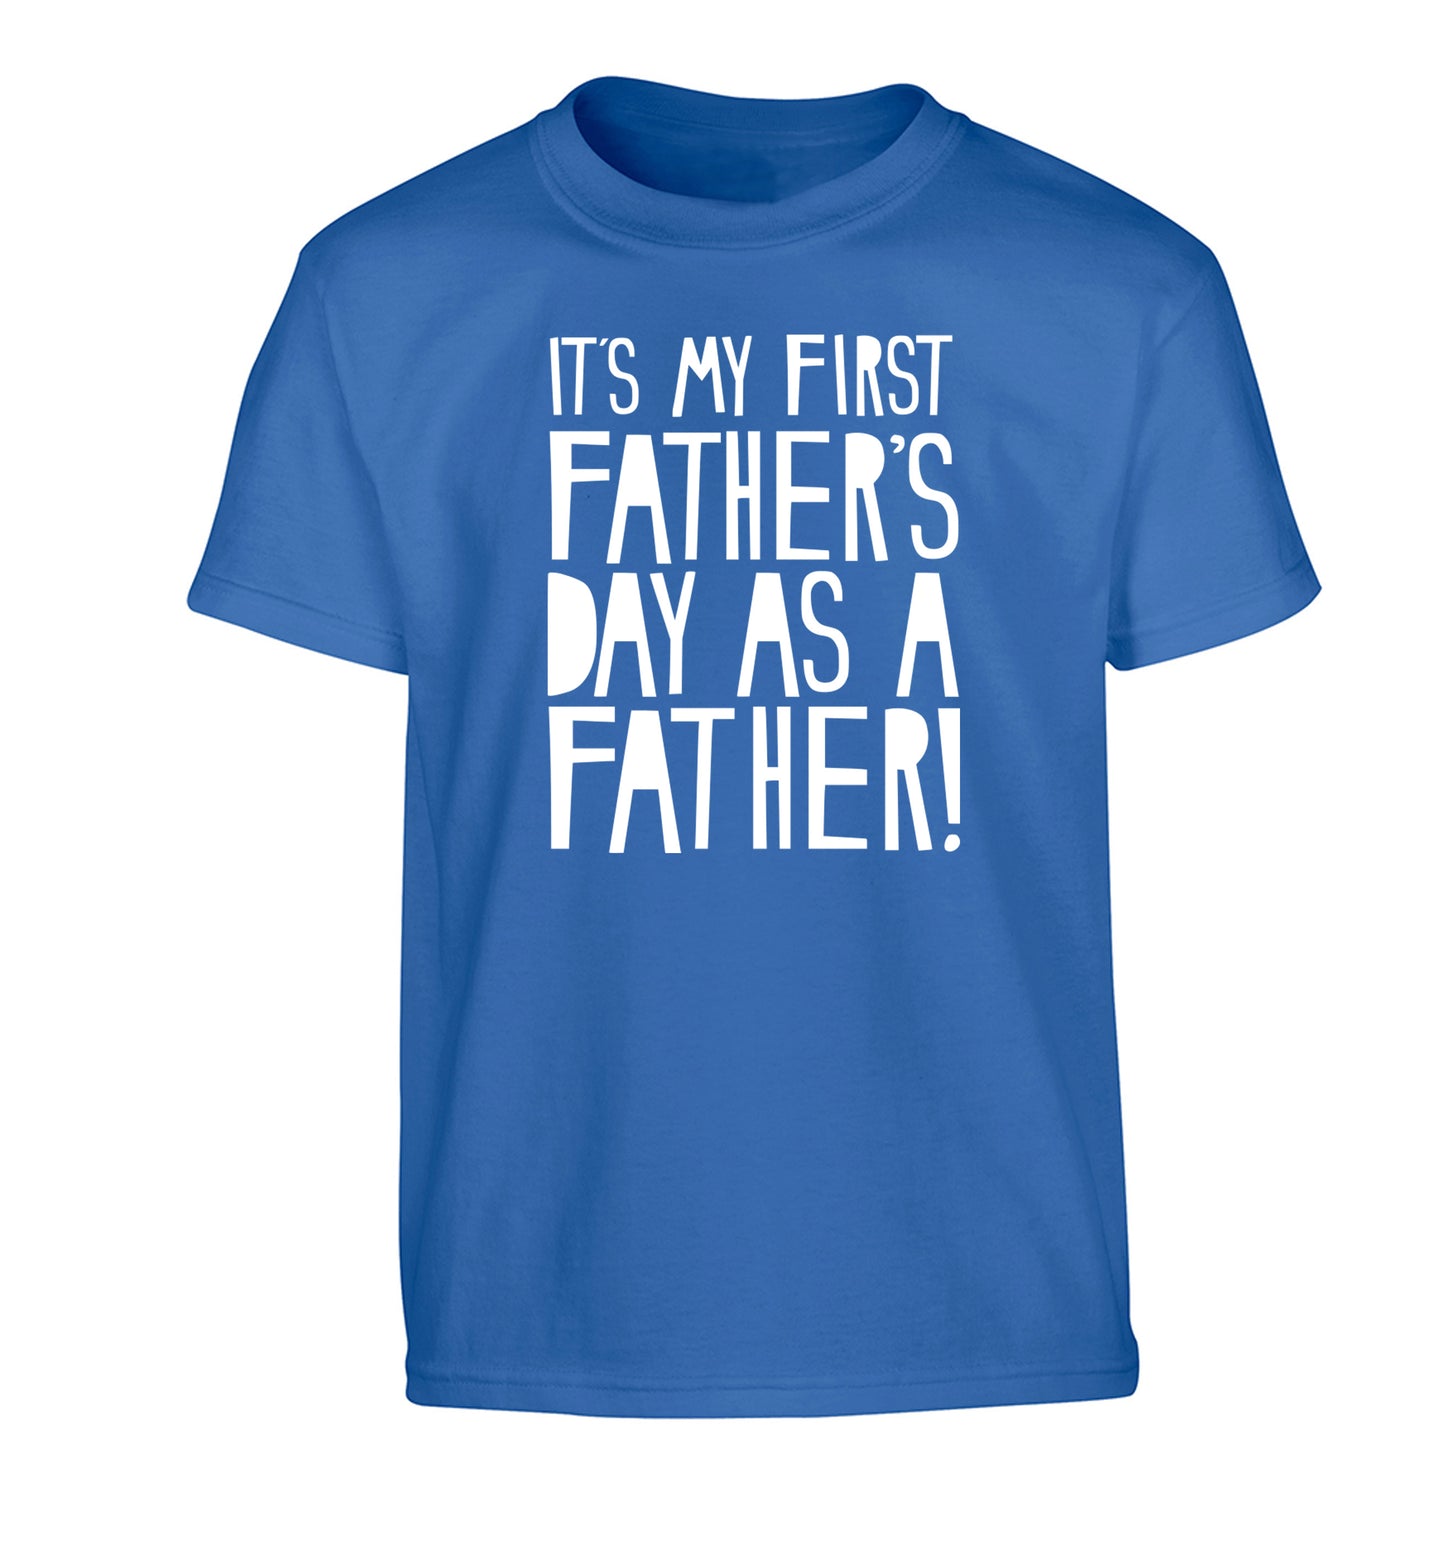 It's my first Father's Day as a father! Children's blue Tshirt 12-13 Years